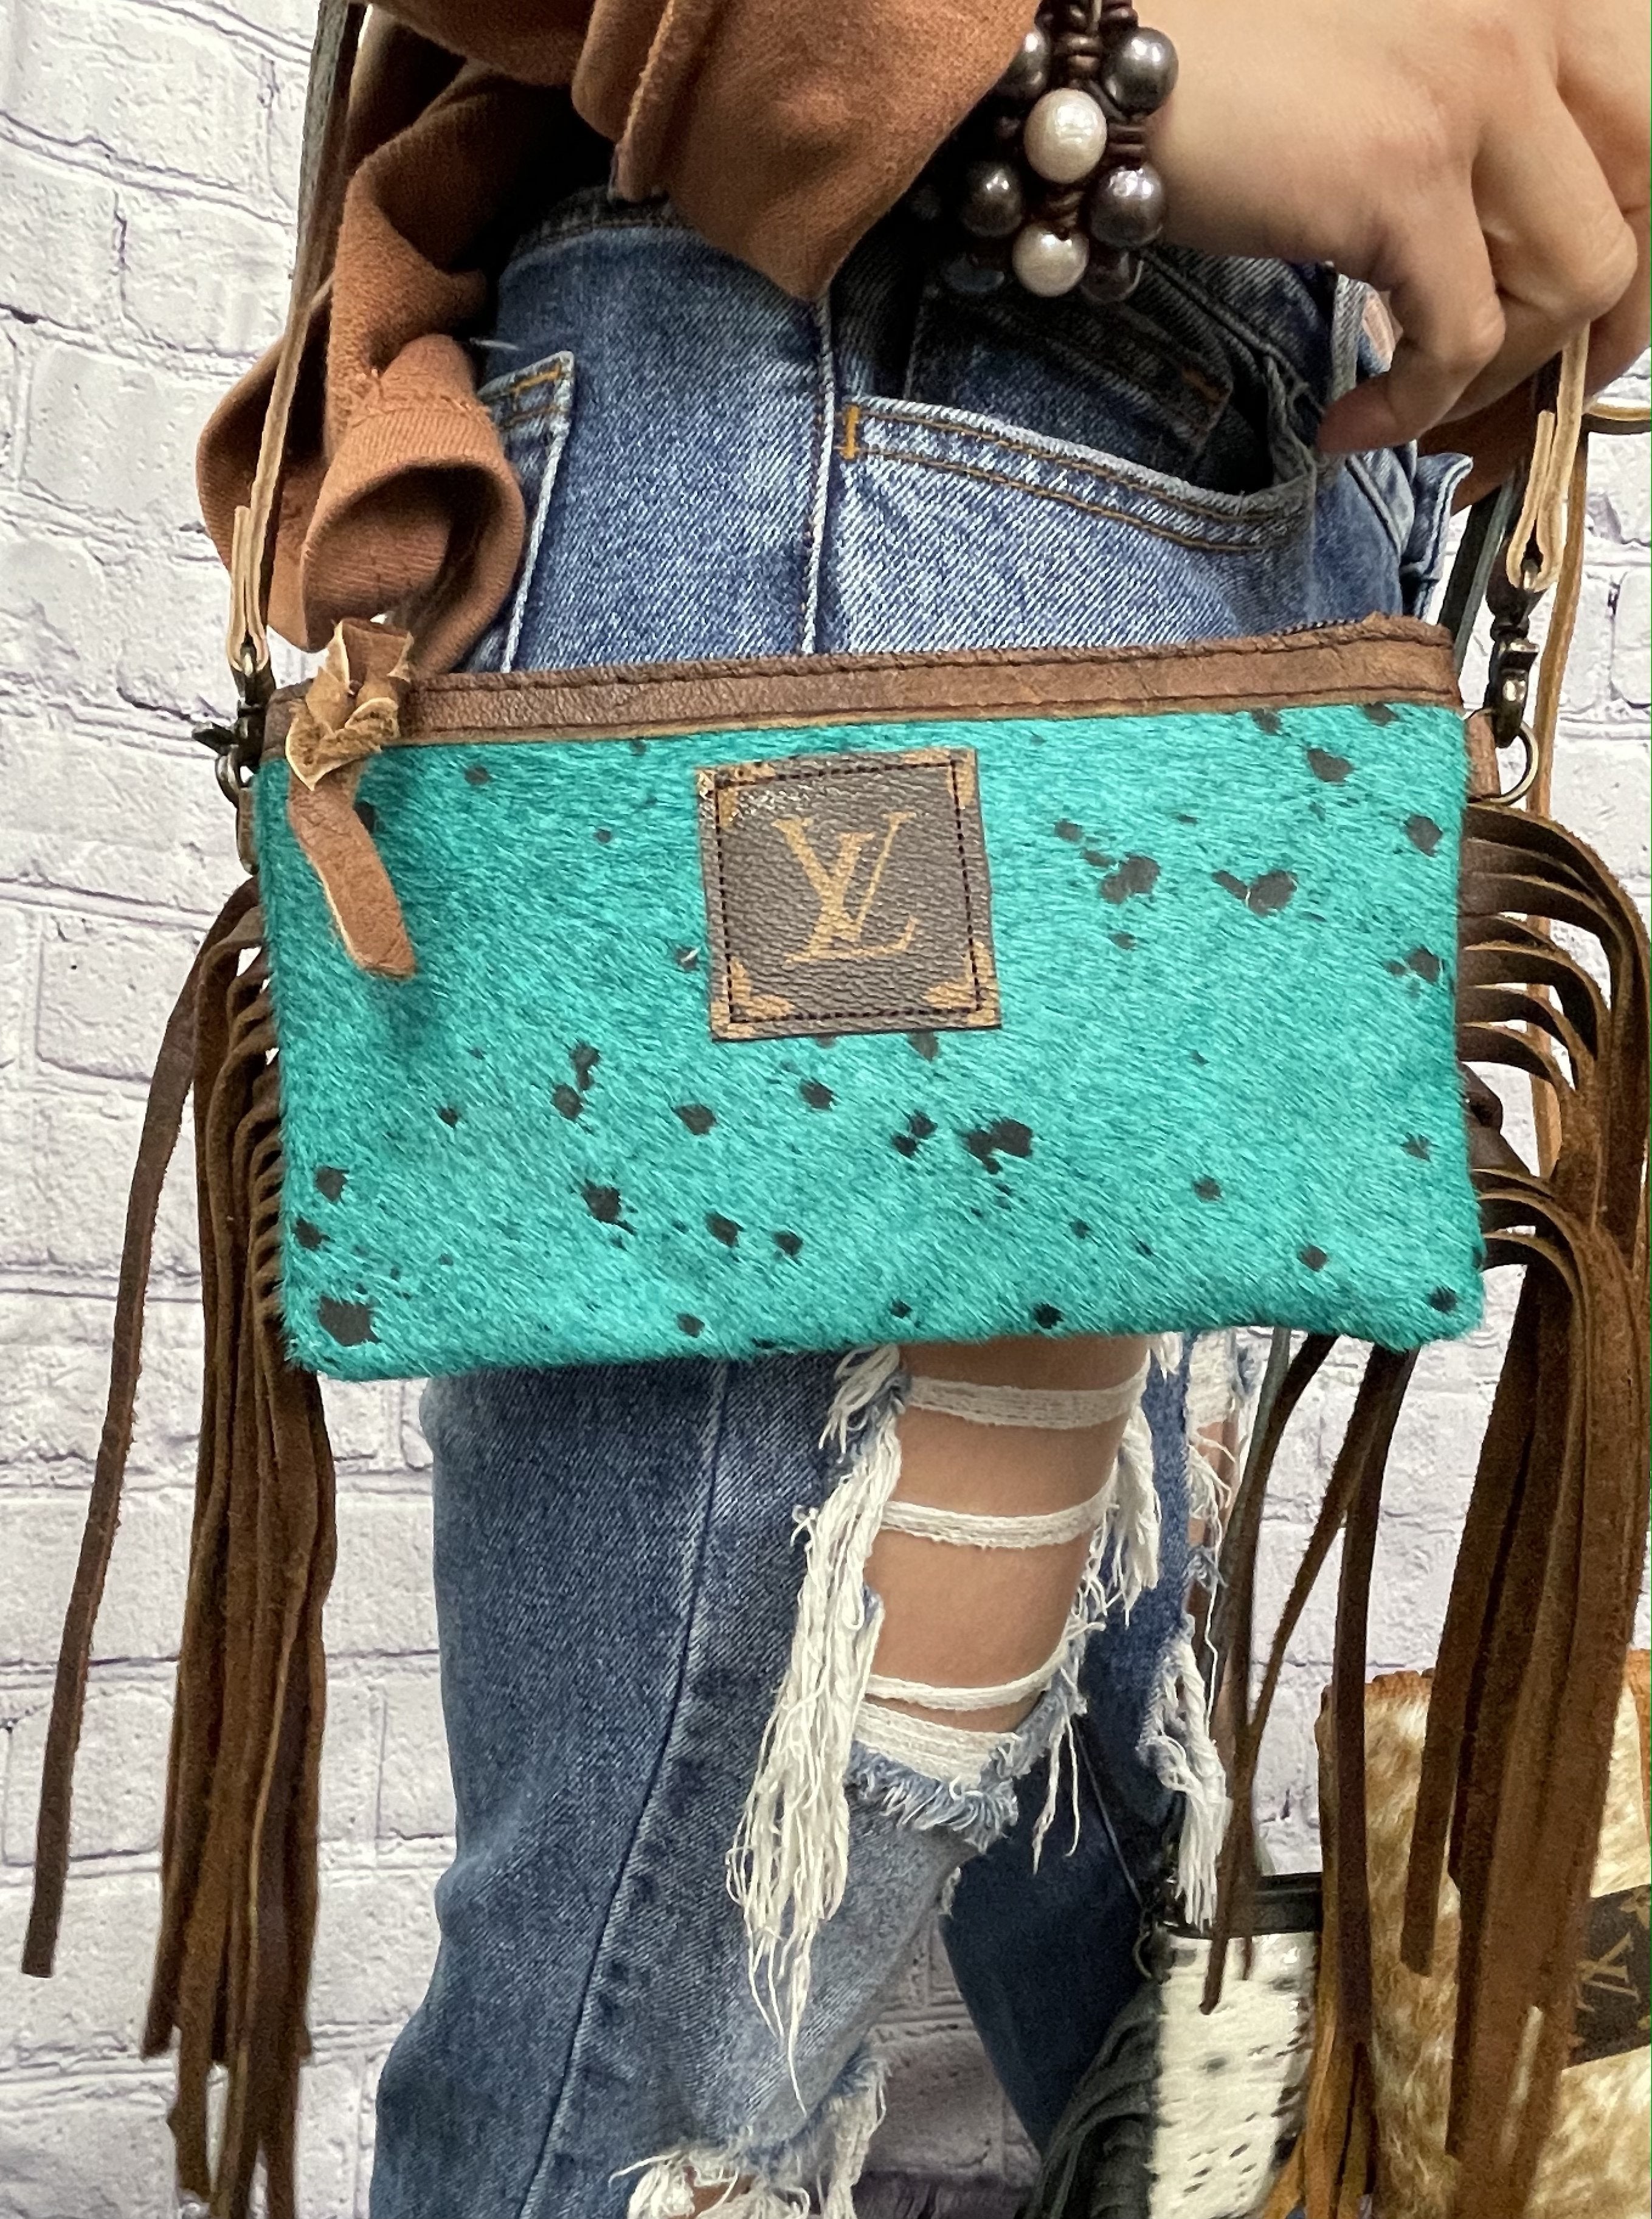 cowhide purse with louis vuitton